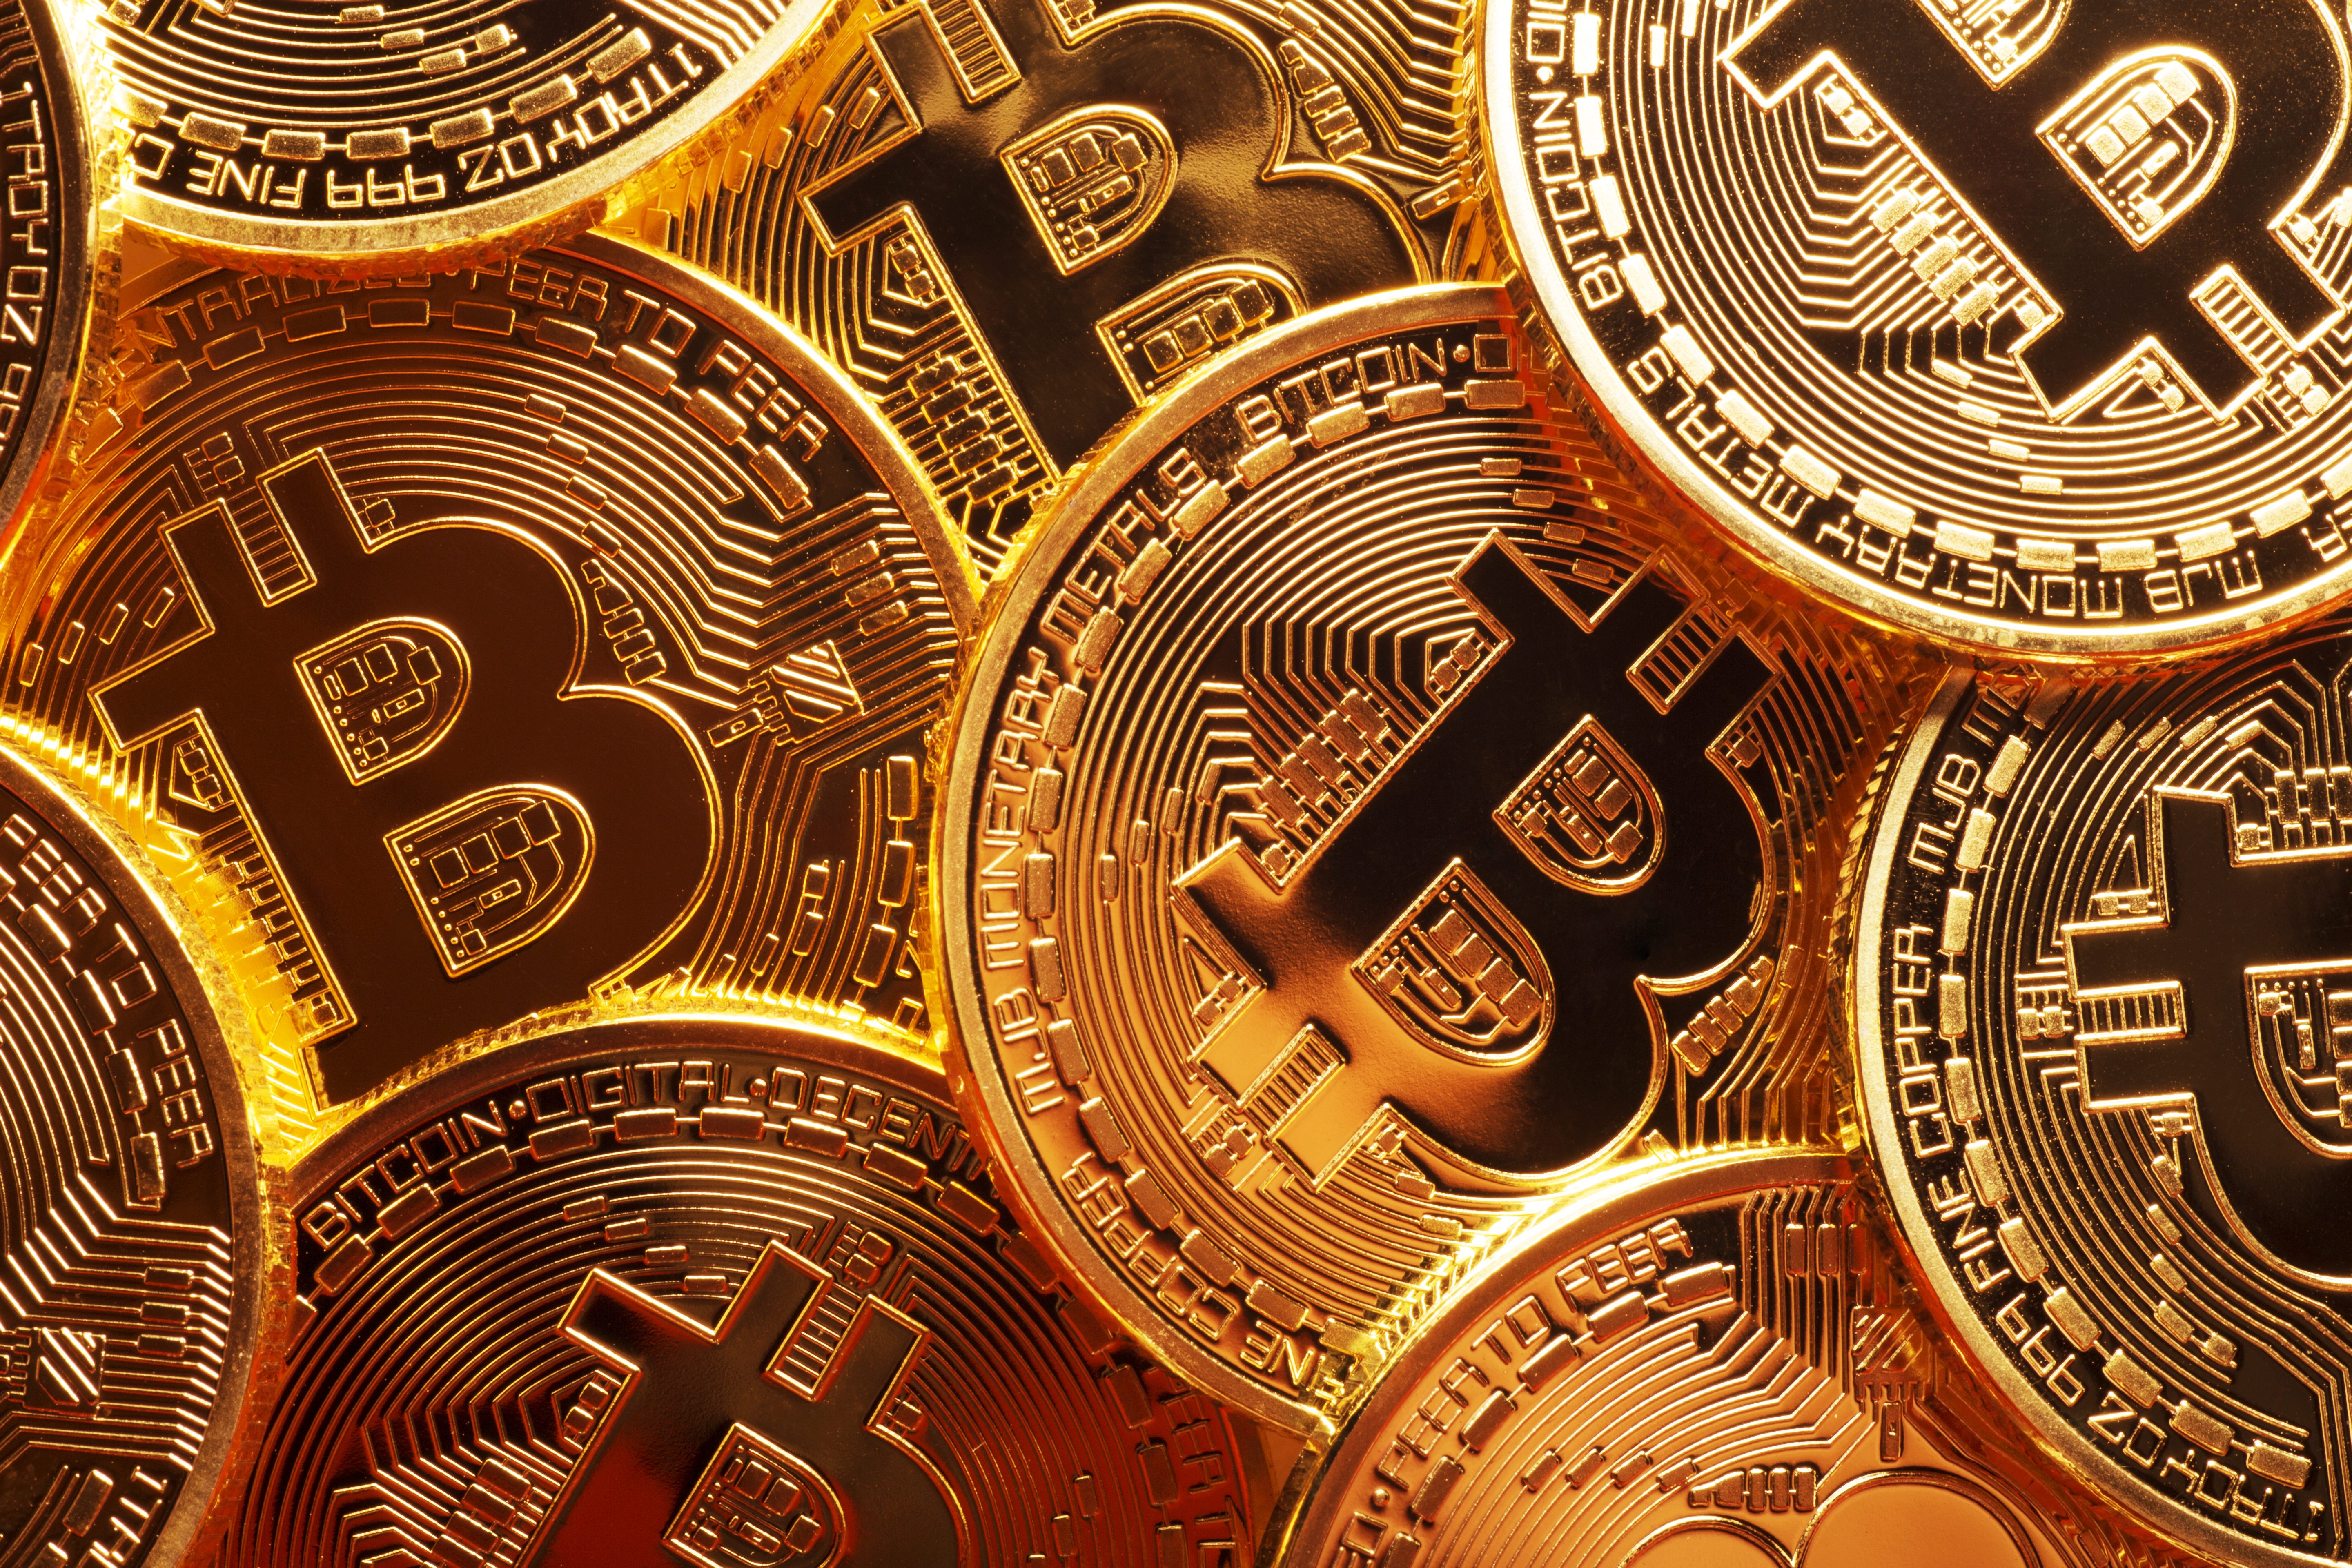 A pile of gold-colored coins with the word "Bitcoin" on them